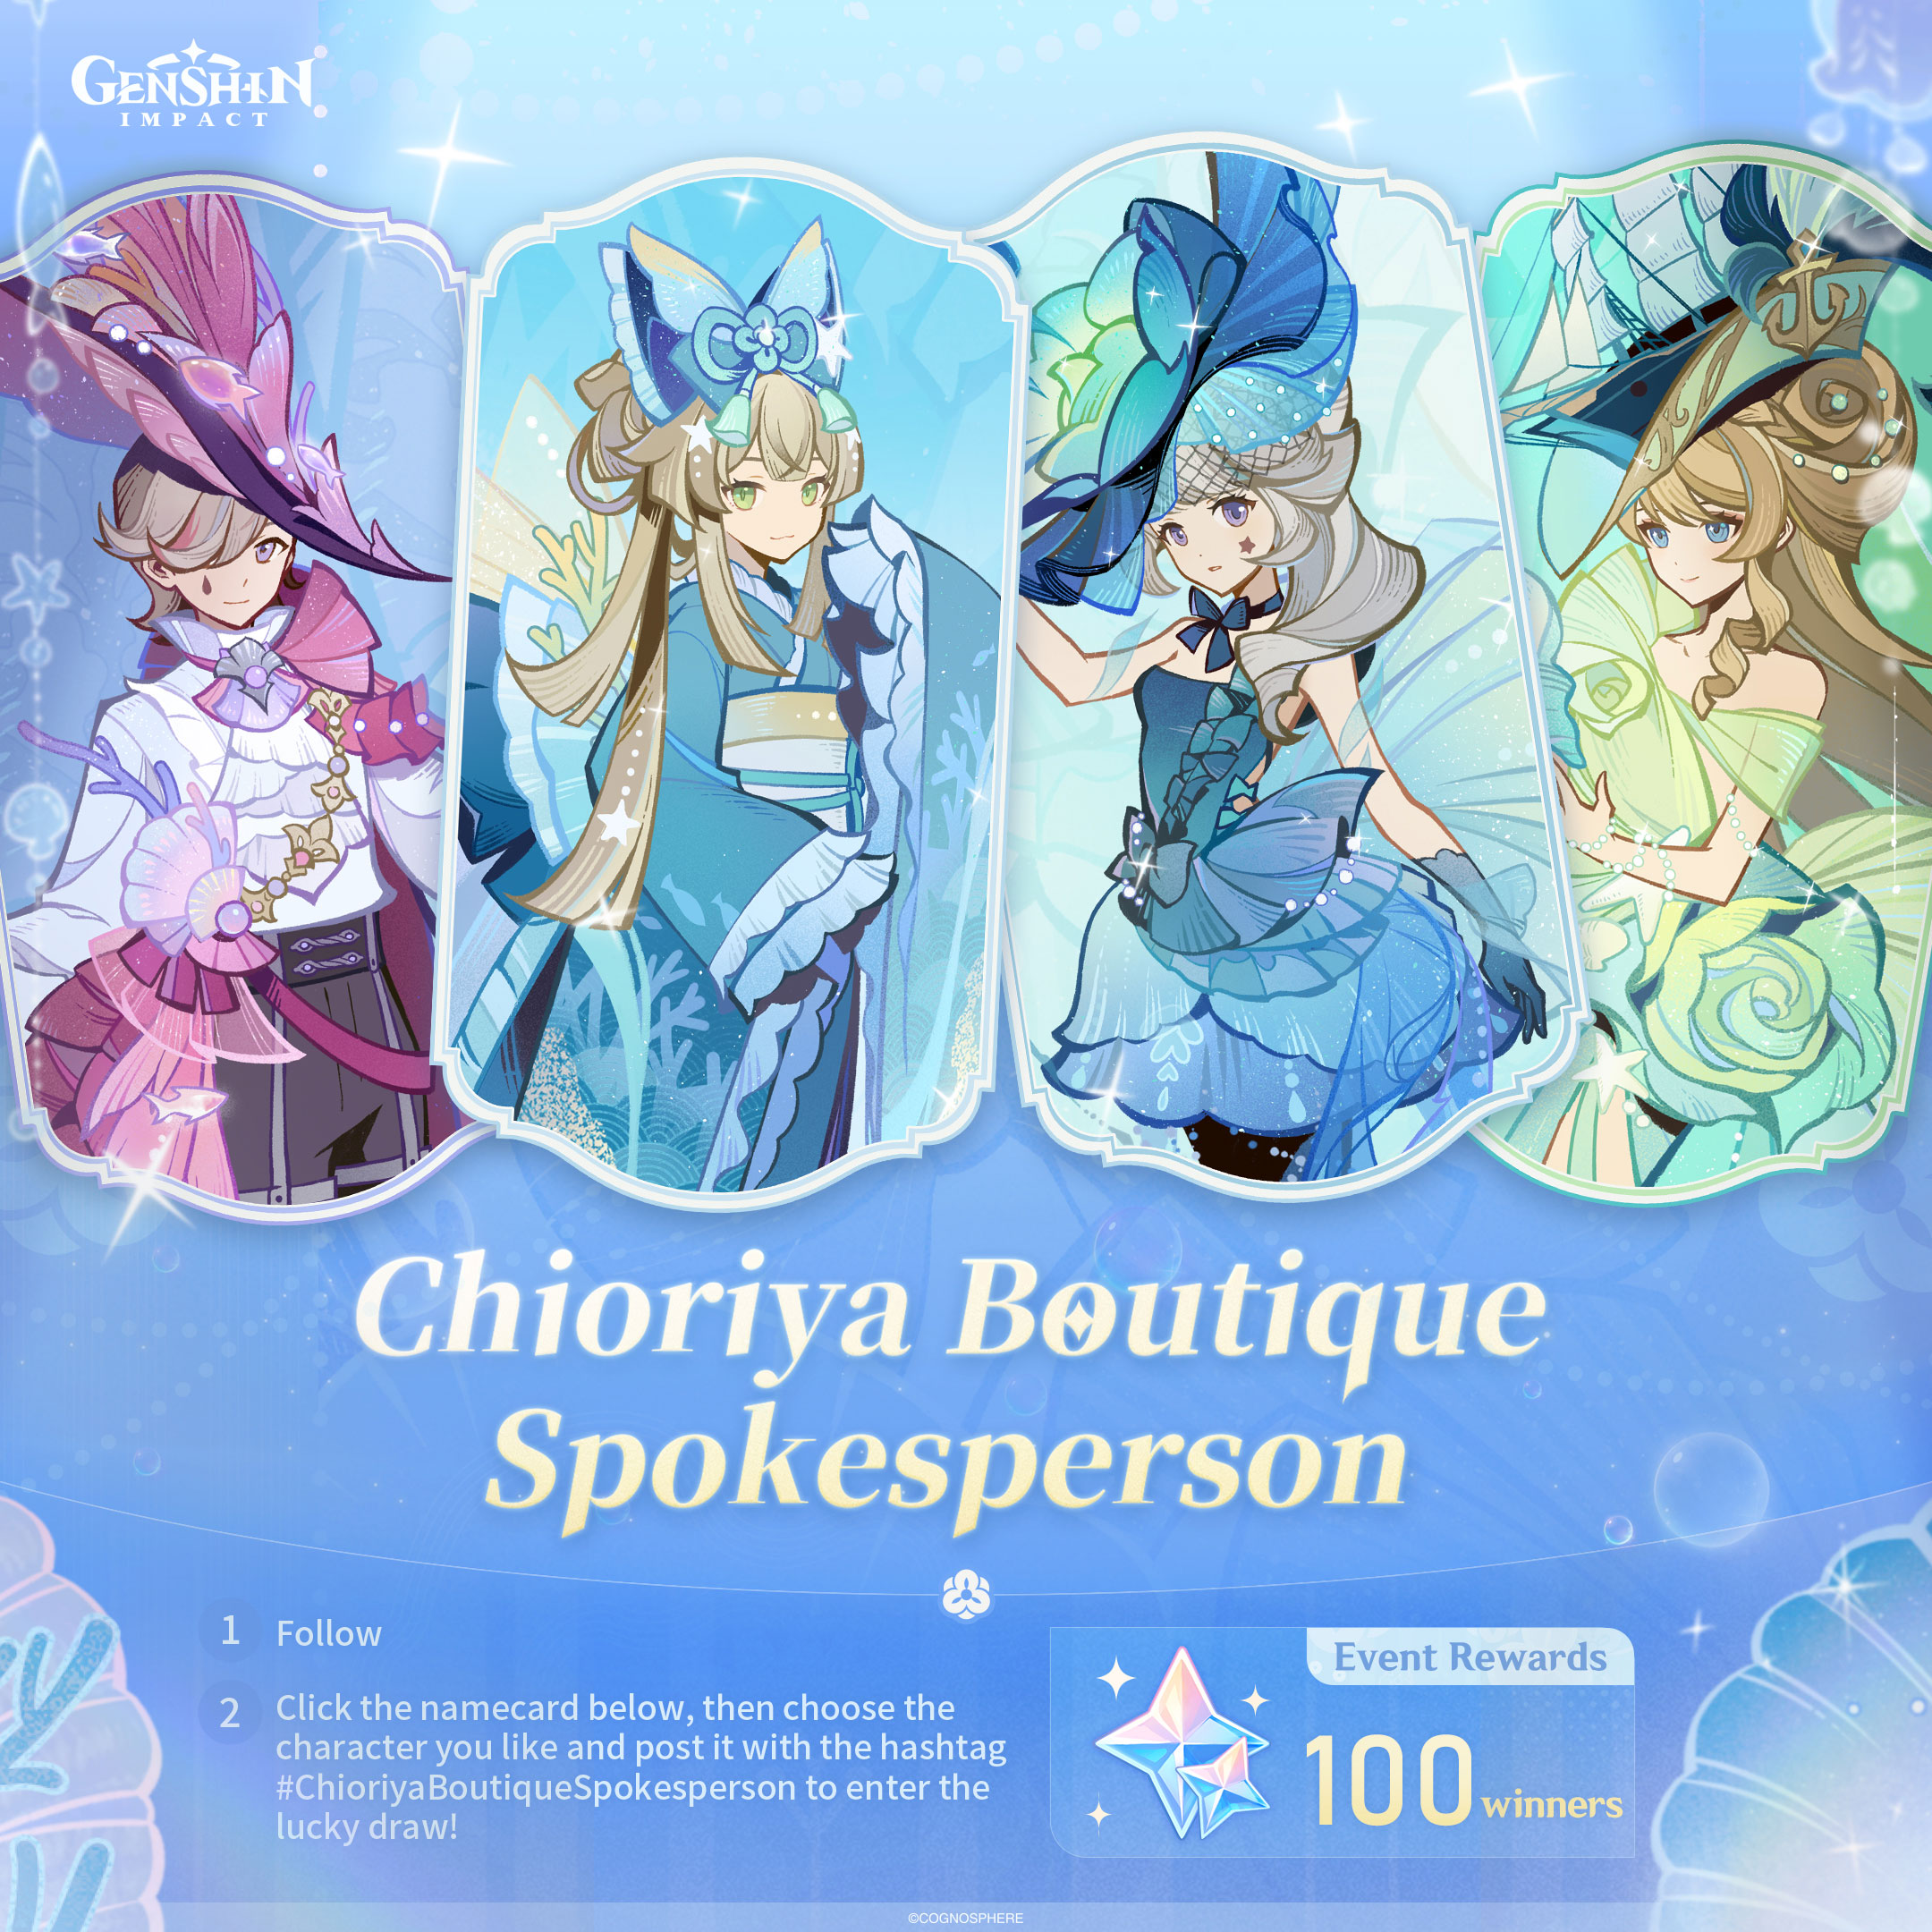 "Chioriya Boutique Spokesperson": Take part in the event to win Primogems!